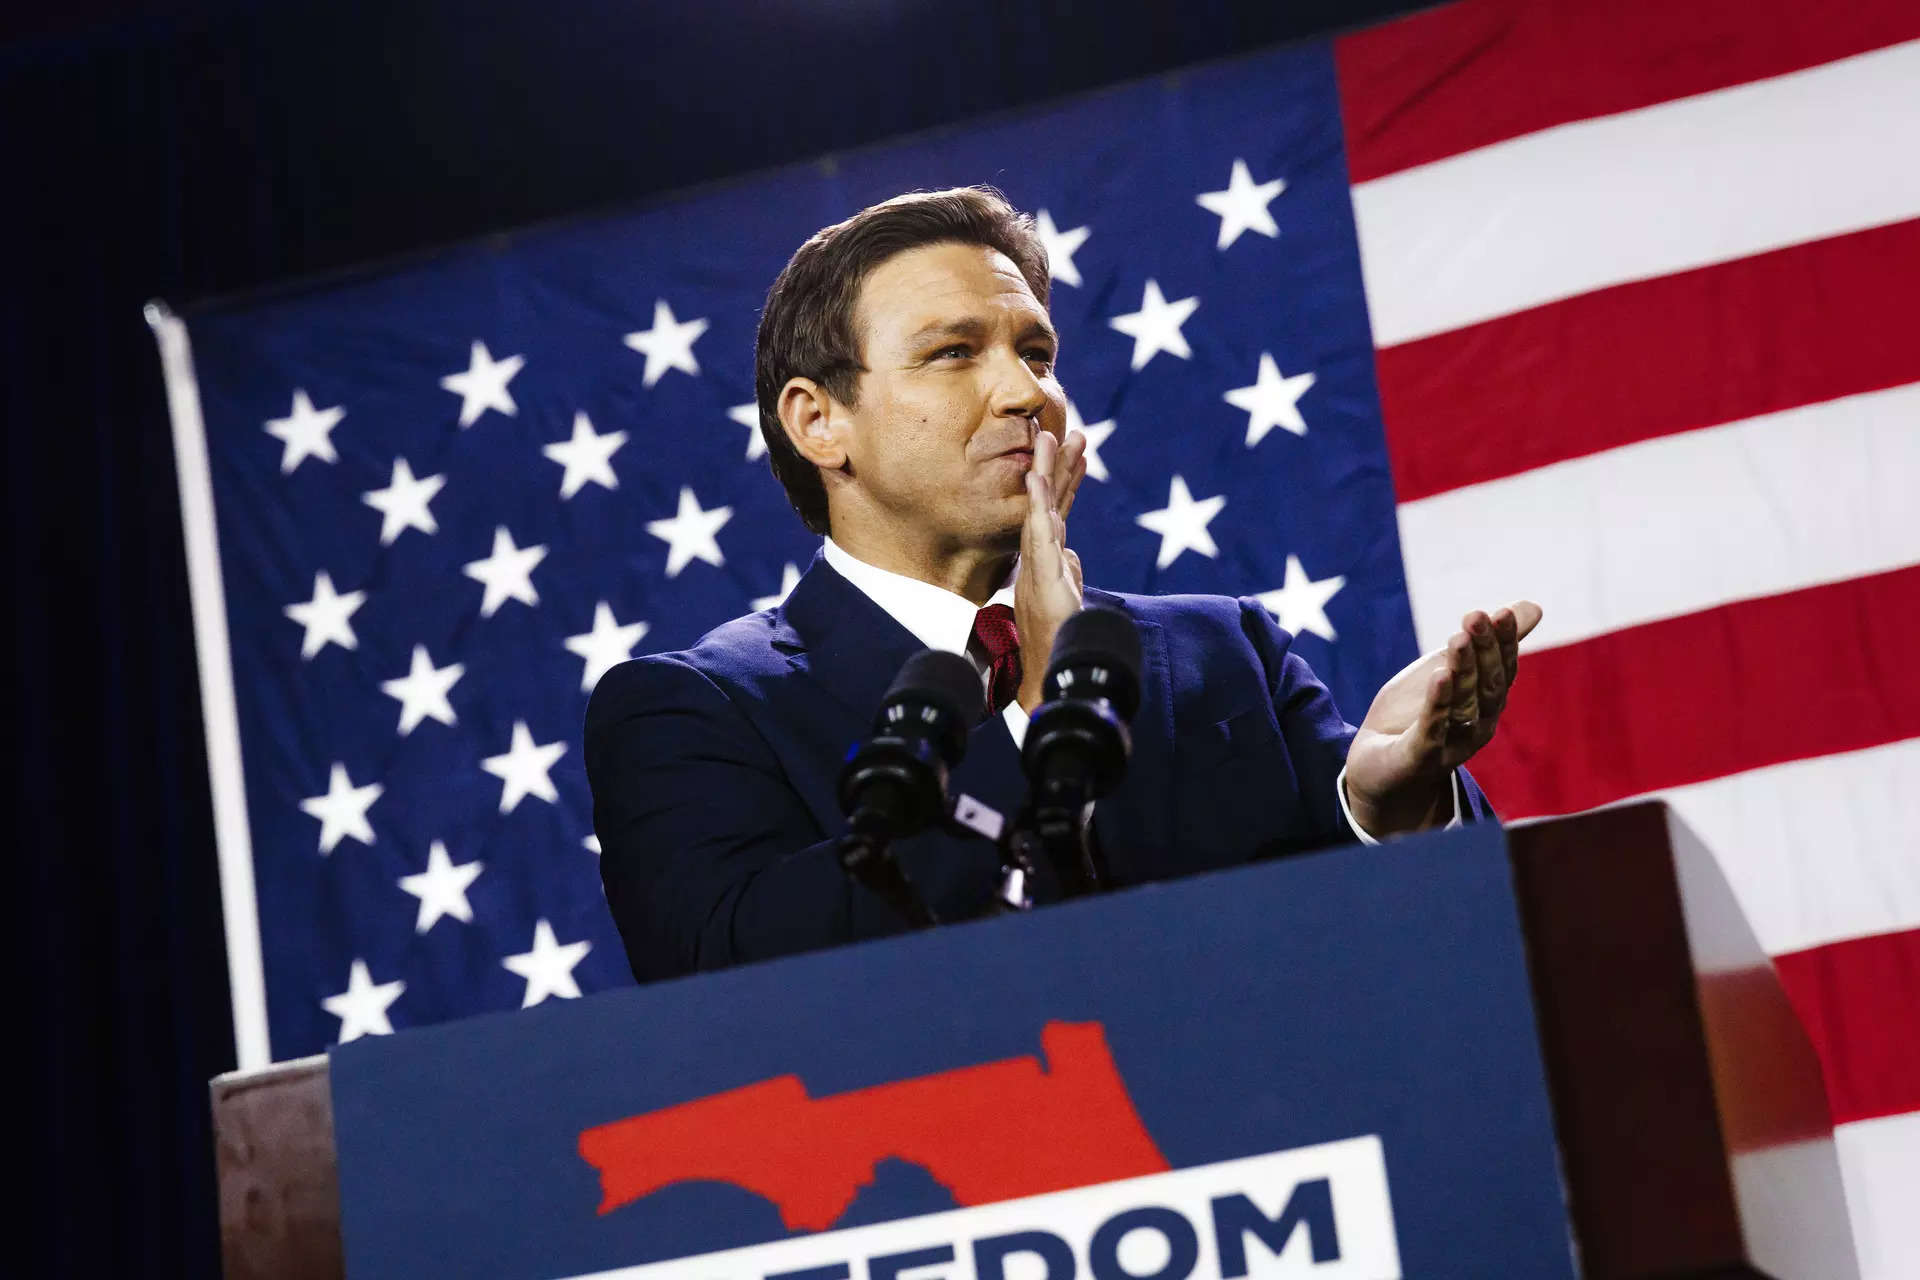 US: DeSantis to campaign in Iowa, New Hampshire and South Carolina after chaotic presidential launch